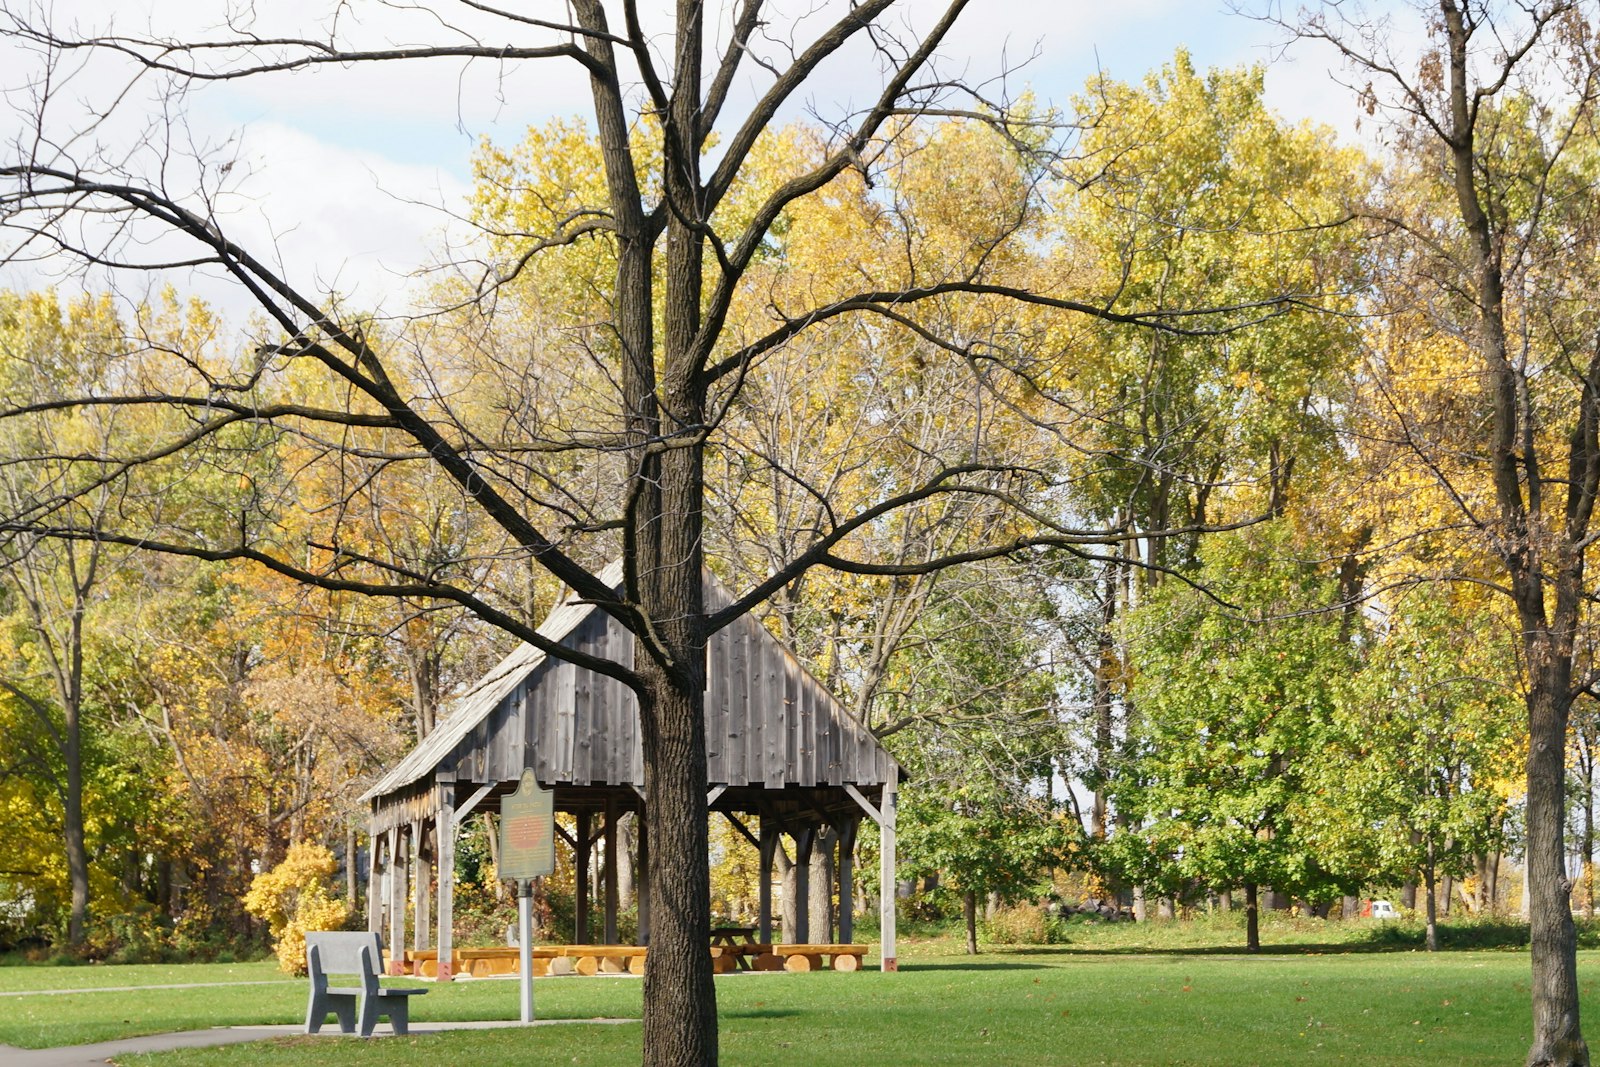 Autumnal-hued trees surround a meadow. Along a trail is a wooden structure with benches underneath, as well as a bench.